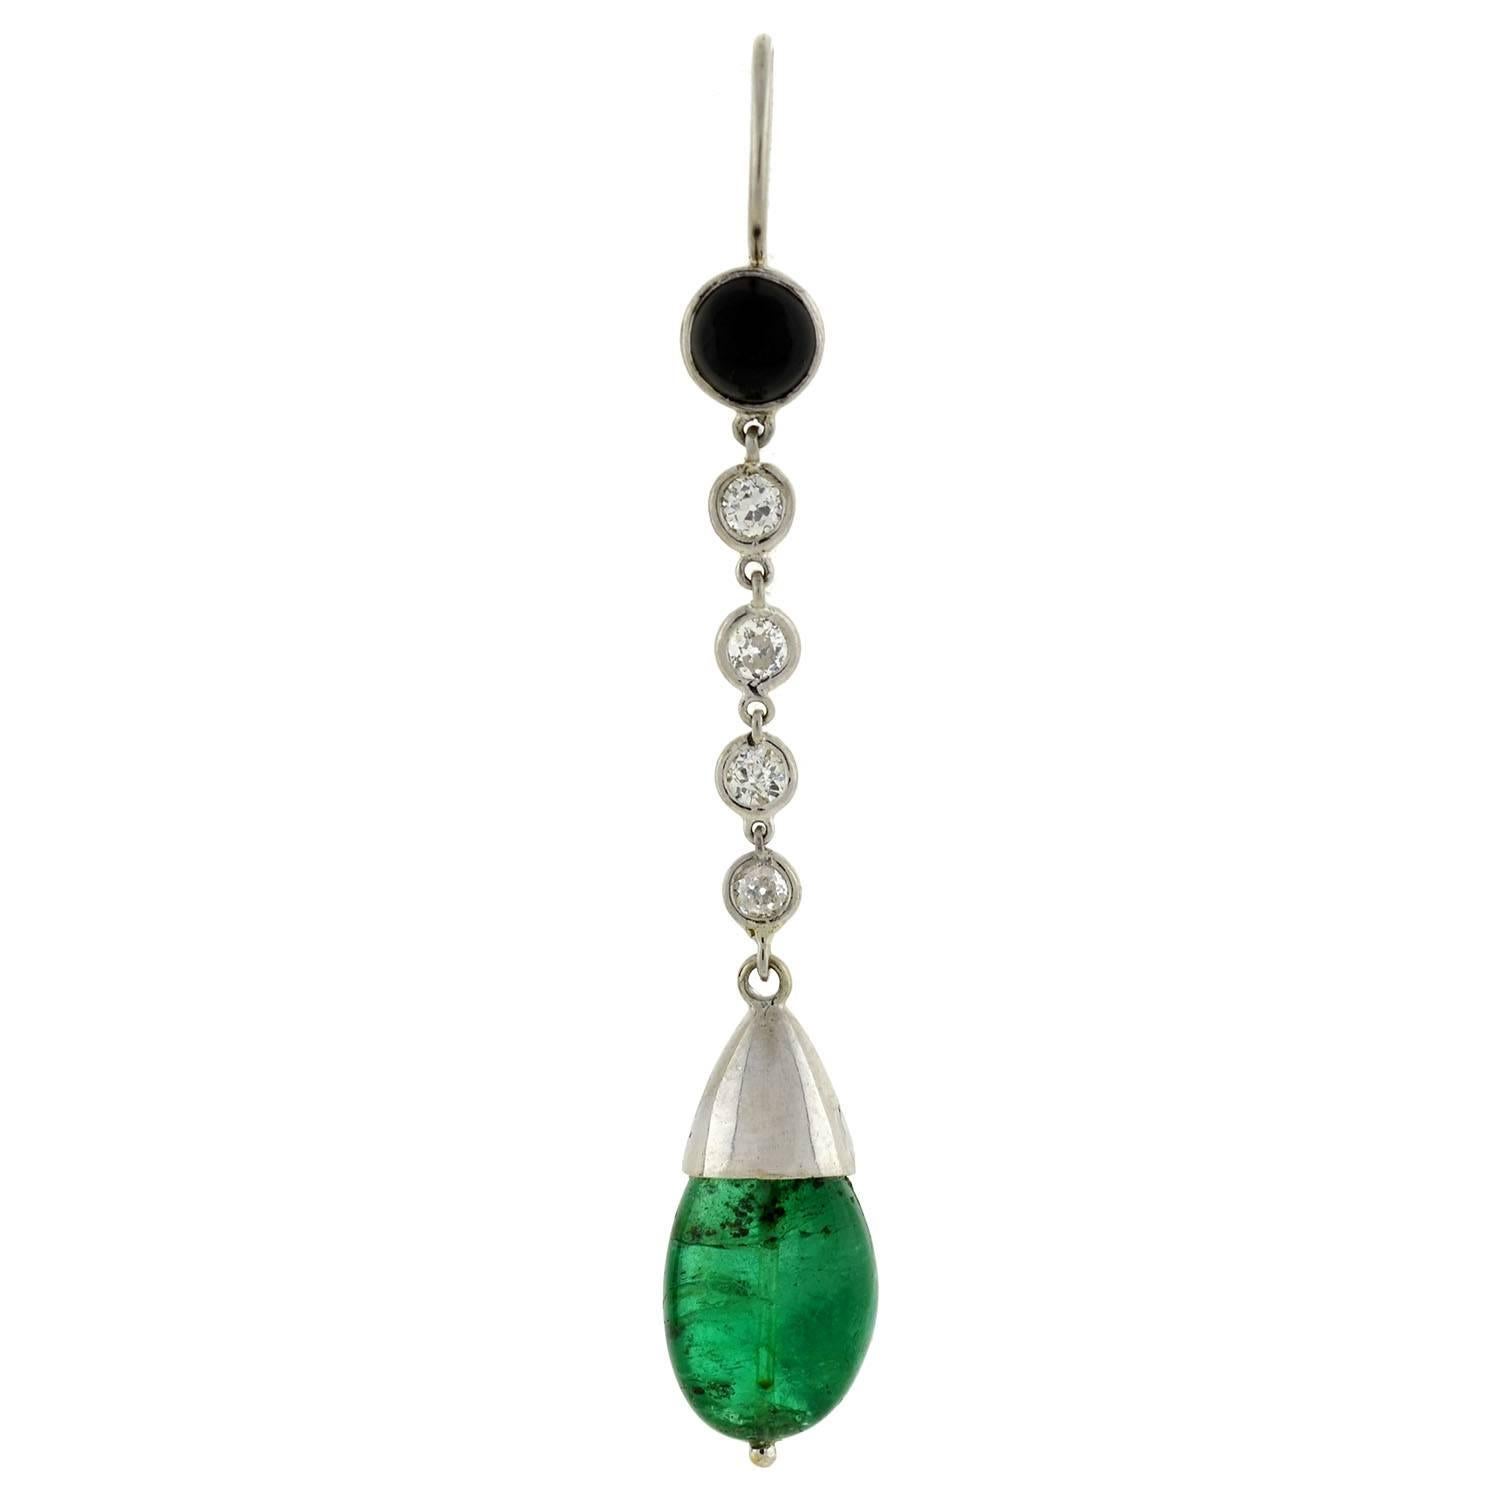 A stunning pair of emerald and diamond compilation earrings from the late Art Deco (ca1930) era! These elegant earrings are made of platinum and display a simple, yet beautiful drop design. Originally screw back earrings, the design now begins with